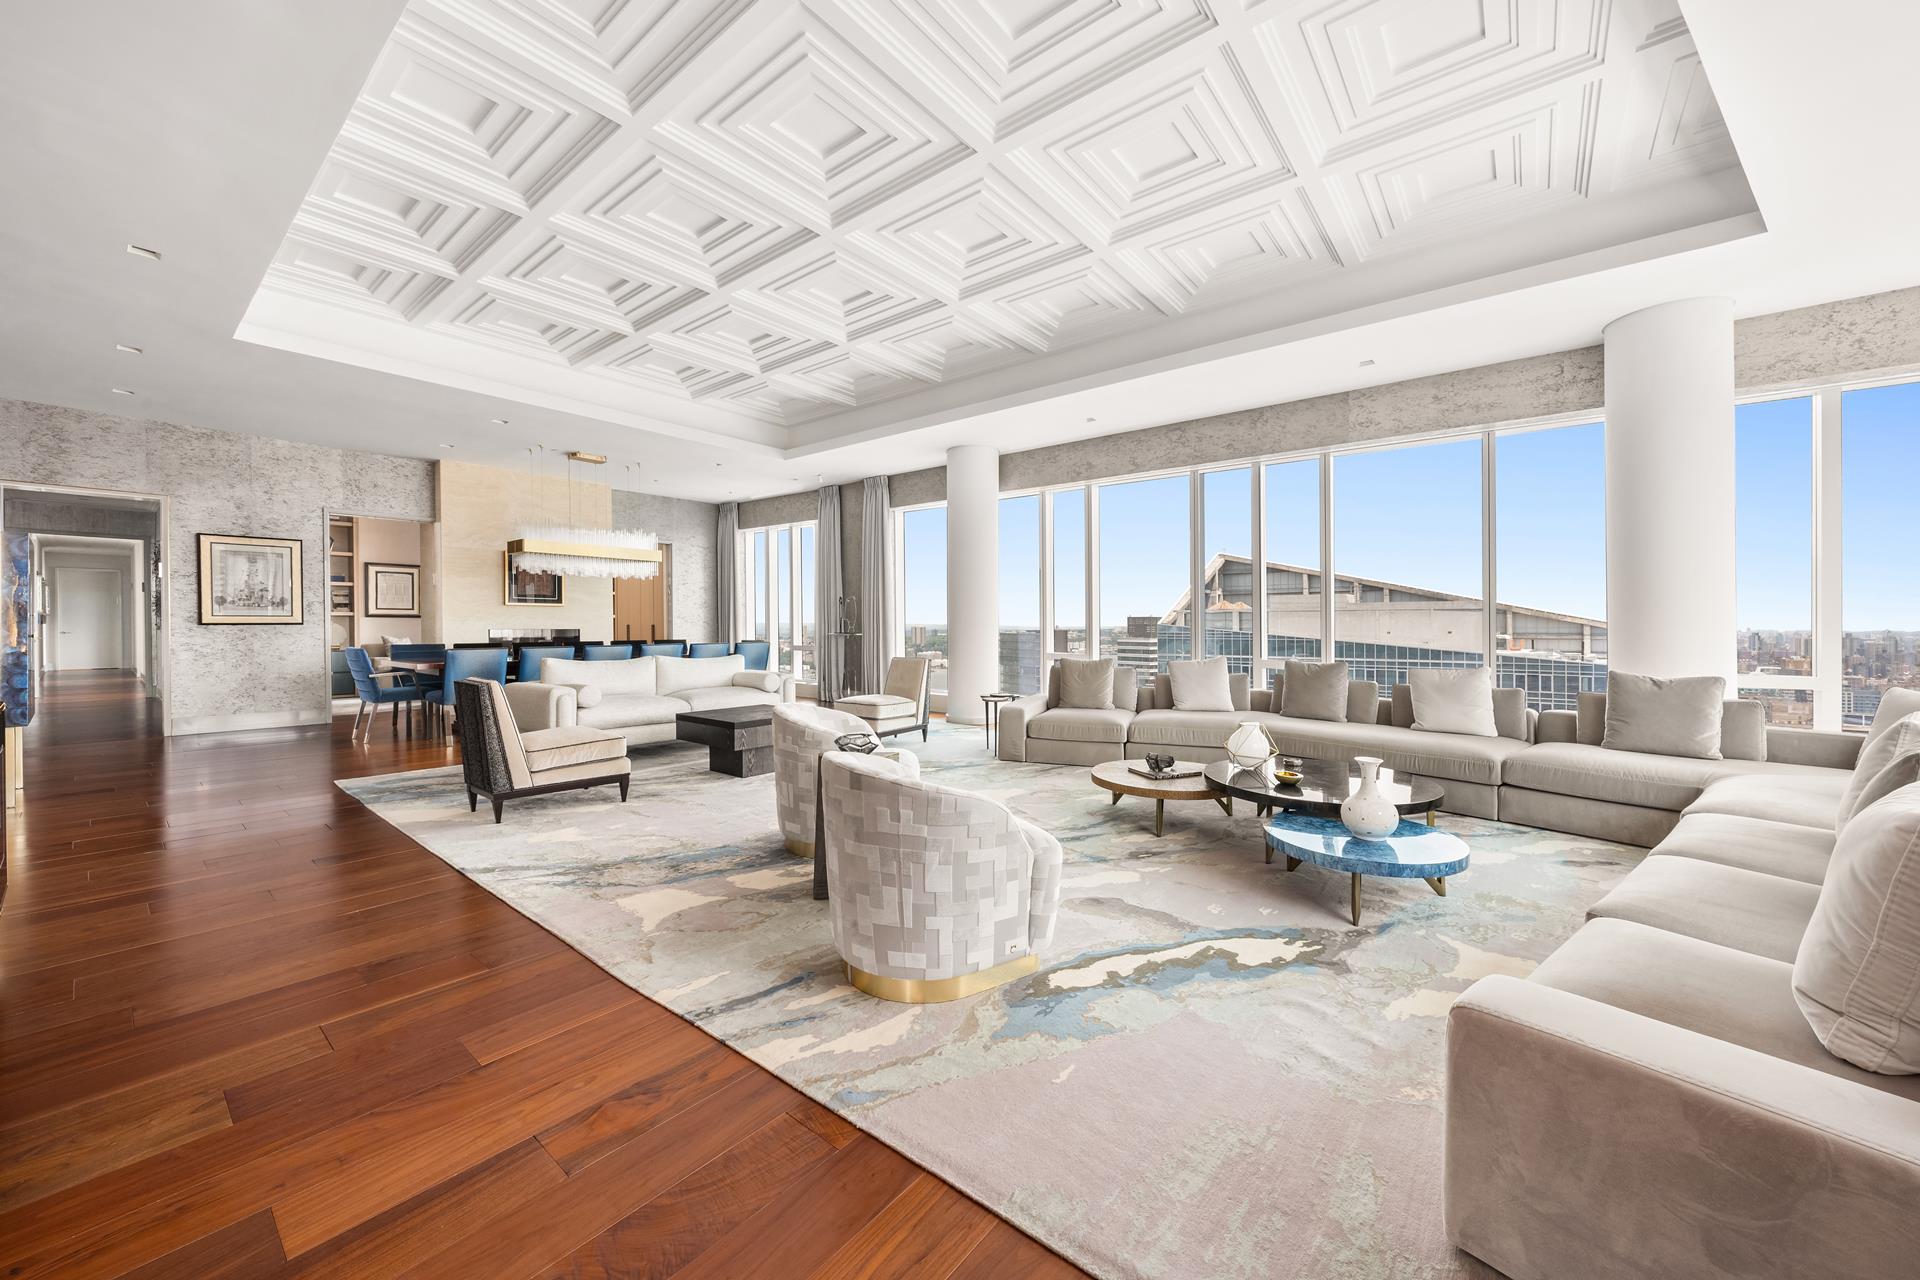 1 West End Avenue Pha, Lincoln Sq, Upper West Side, NYC - 4 Bedrooms  
5.5 Bathrooms  
8 Rooms - 